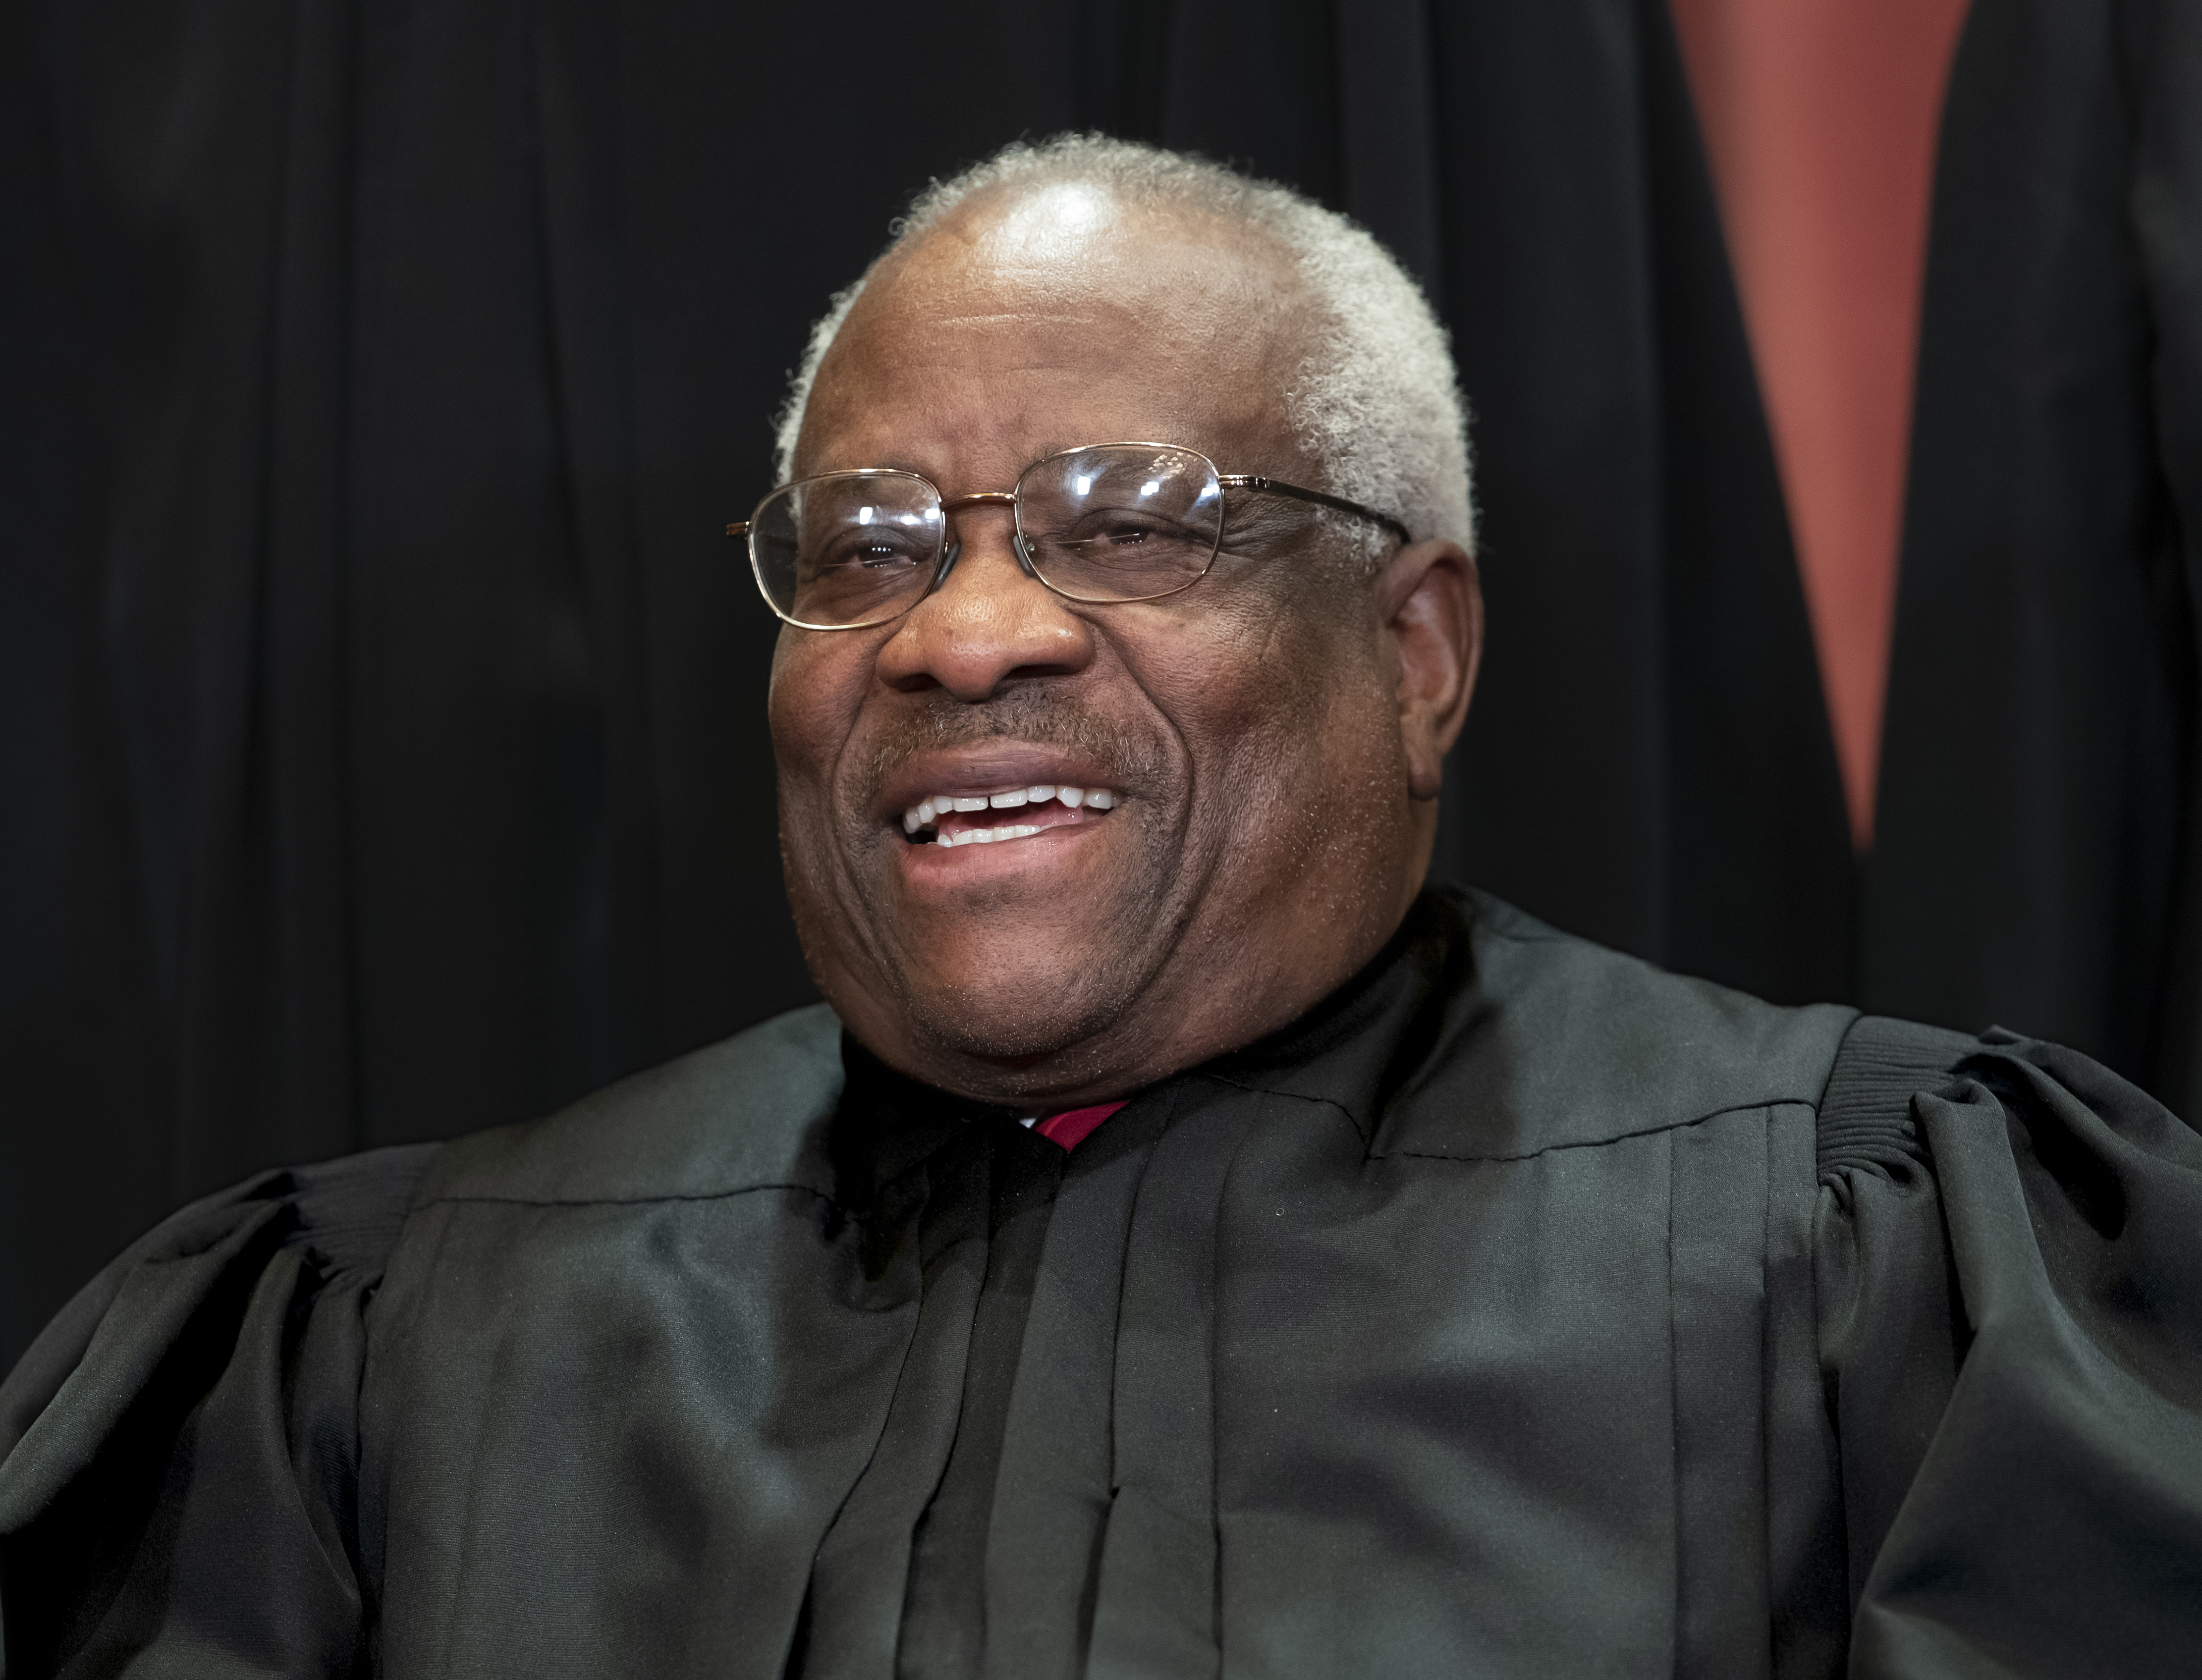 Associate Justice Clarence Thomas sits with fellow Supreme Court justices for a group portrait at the Supreme Court Building in Washington on Nov. 30, 2018. Thomas spoke at a U.S. Supreme Court argument for the first time in three years on March 20, 2019. (J. Scott Applewhite—AP)